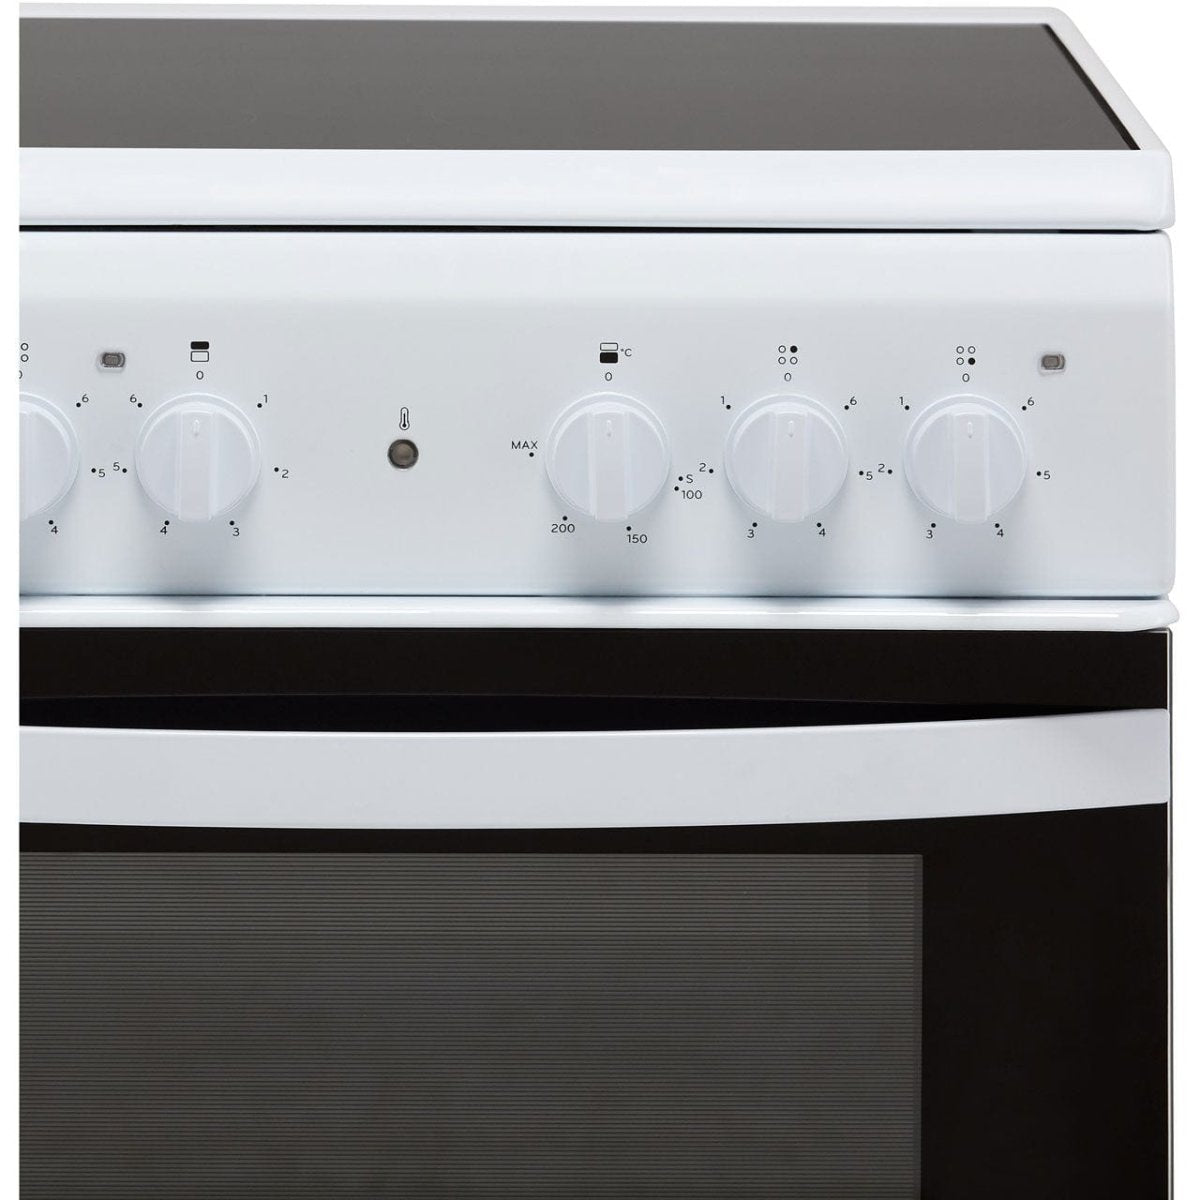 Indesit Cloe ID5V92KMW Twin Cavity Electric Cooker with Ceramic Hob - White - A Rated - Atlantic Electrics